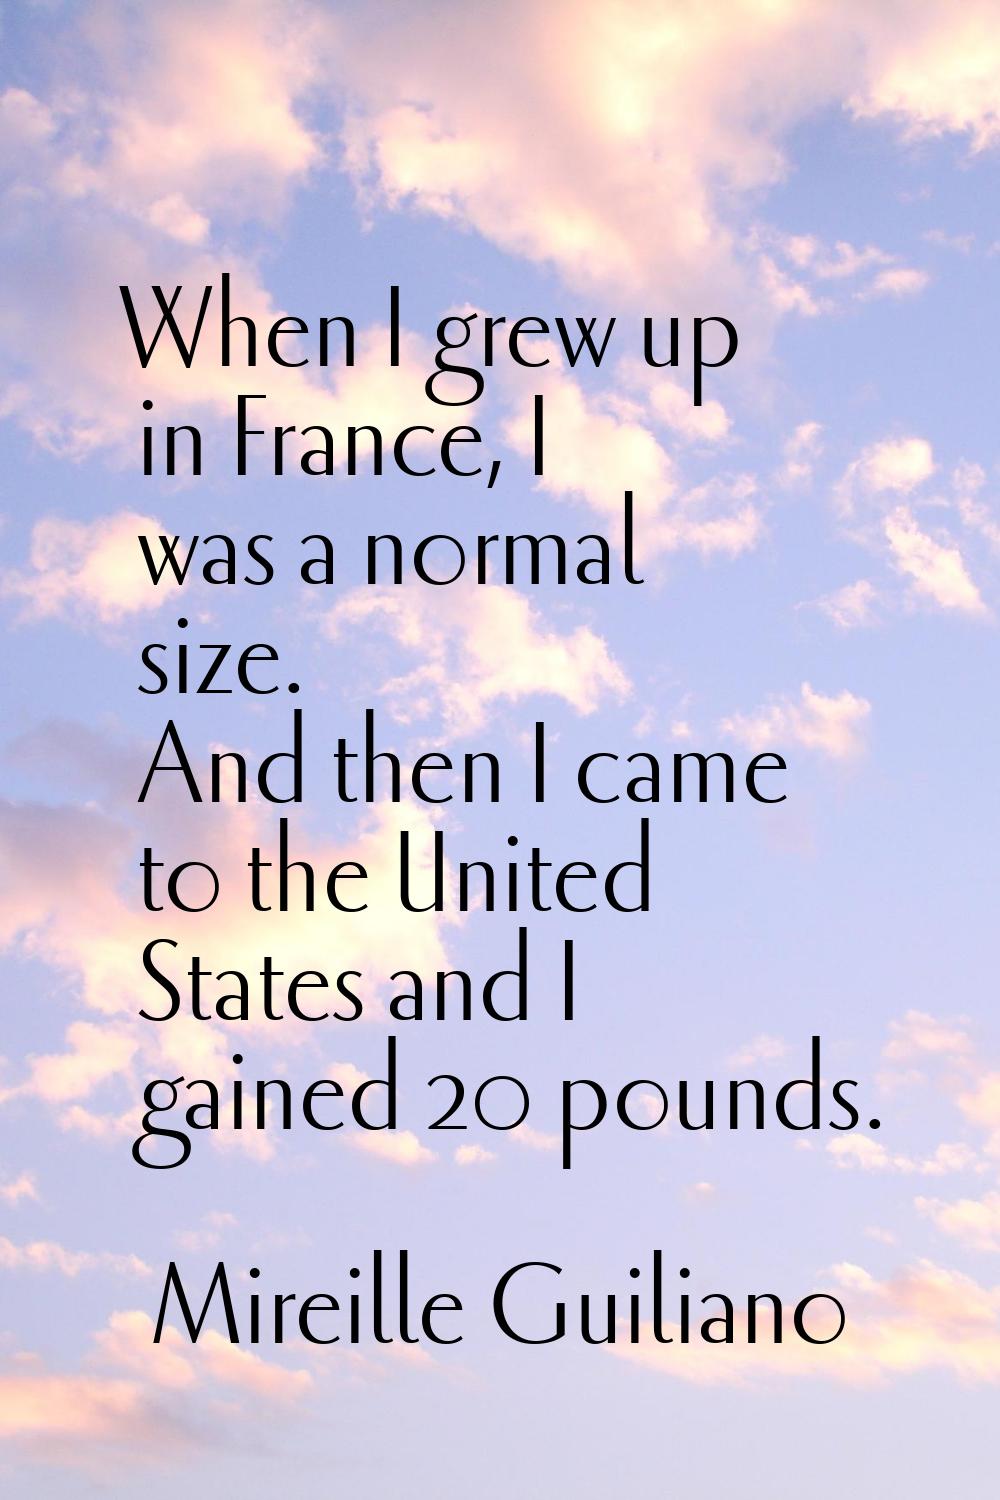 When I grew up in France, I was a normal size. And then I came to the United States and I gained 20